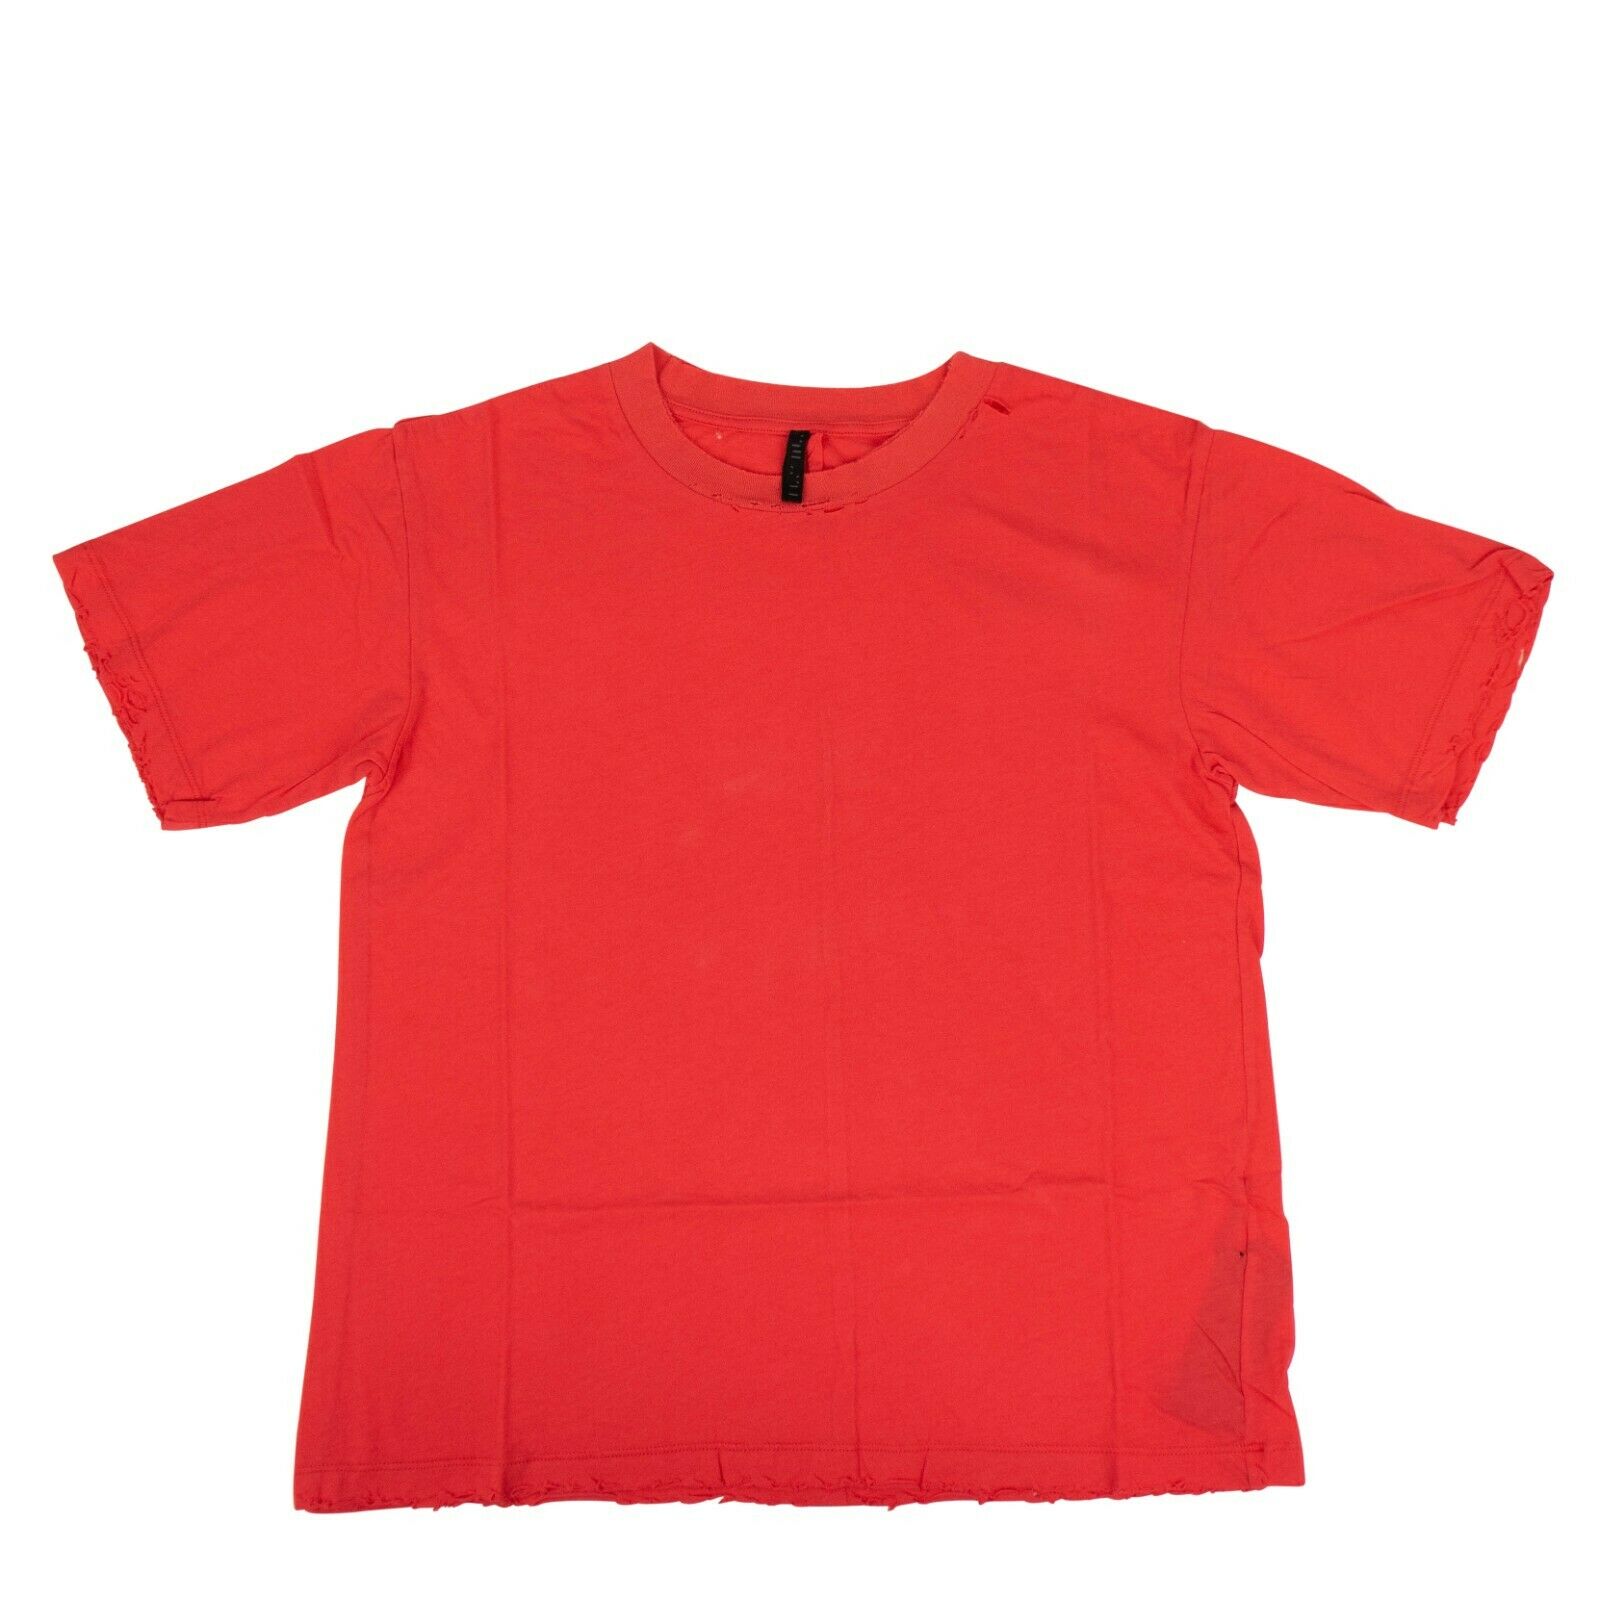 Ben Taverniti Unravel Project Cotton Distressed Short Sleeve T-shirt Top - Red